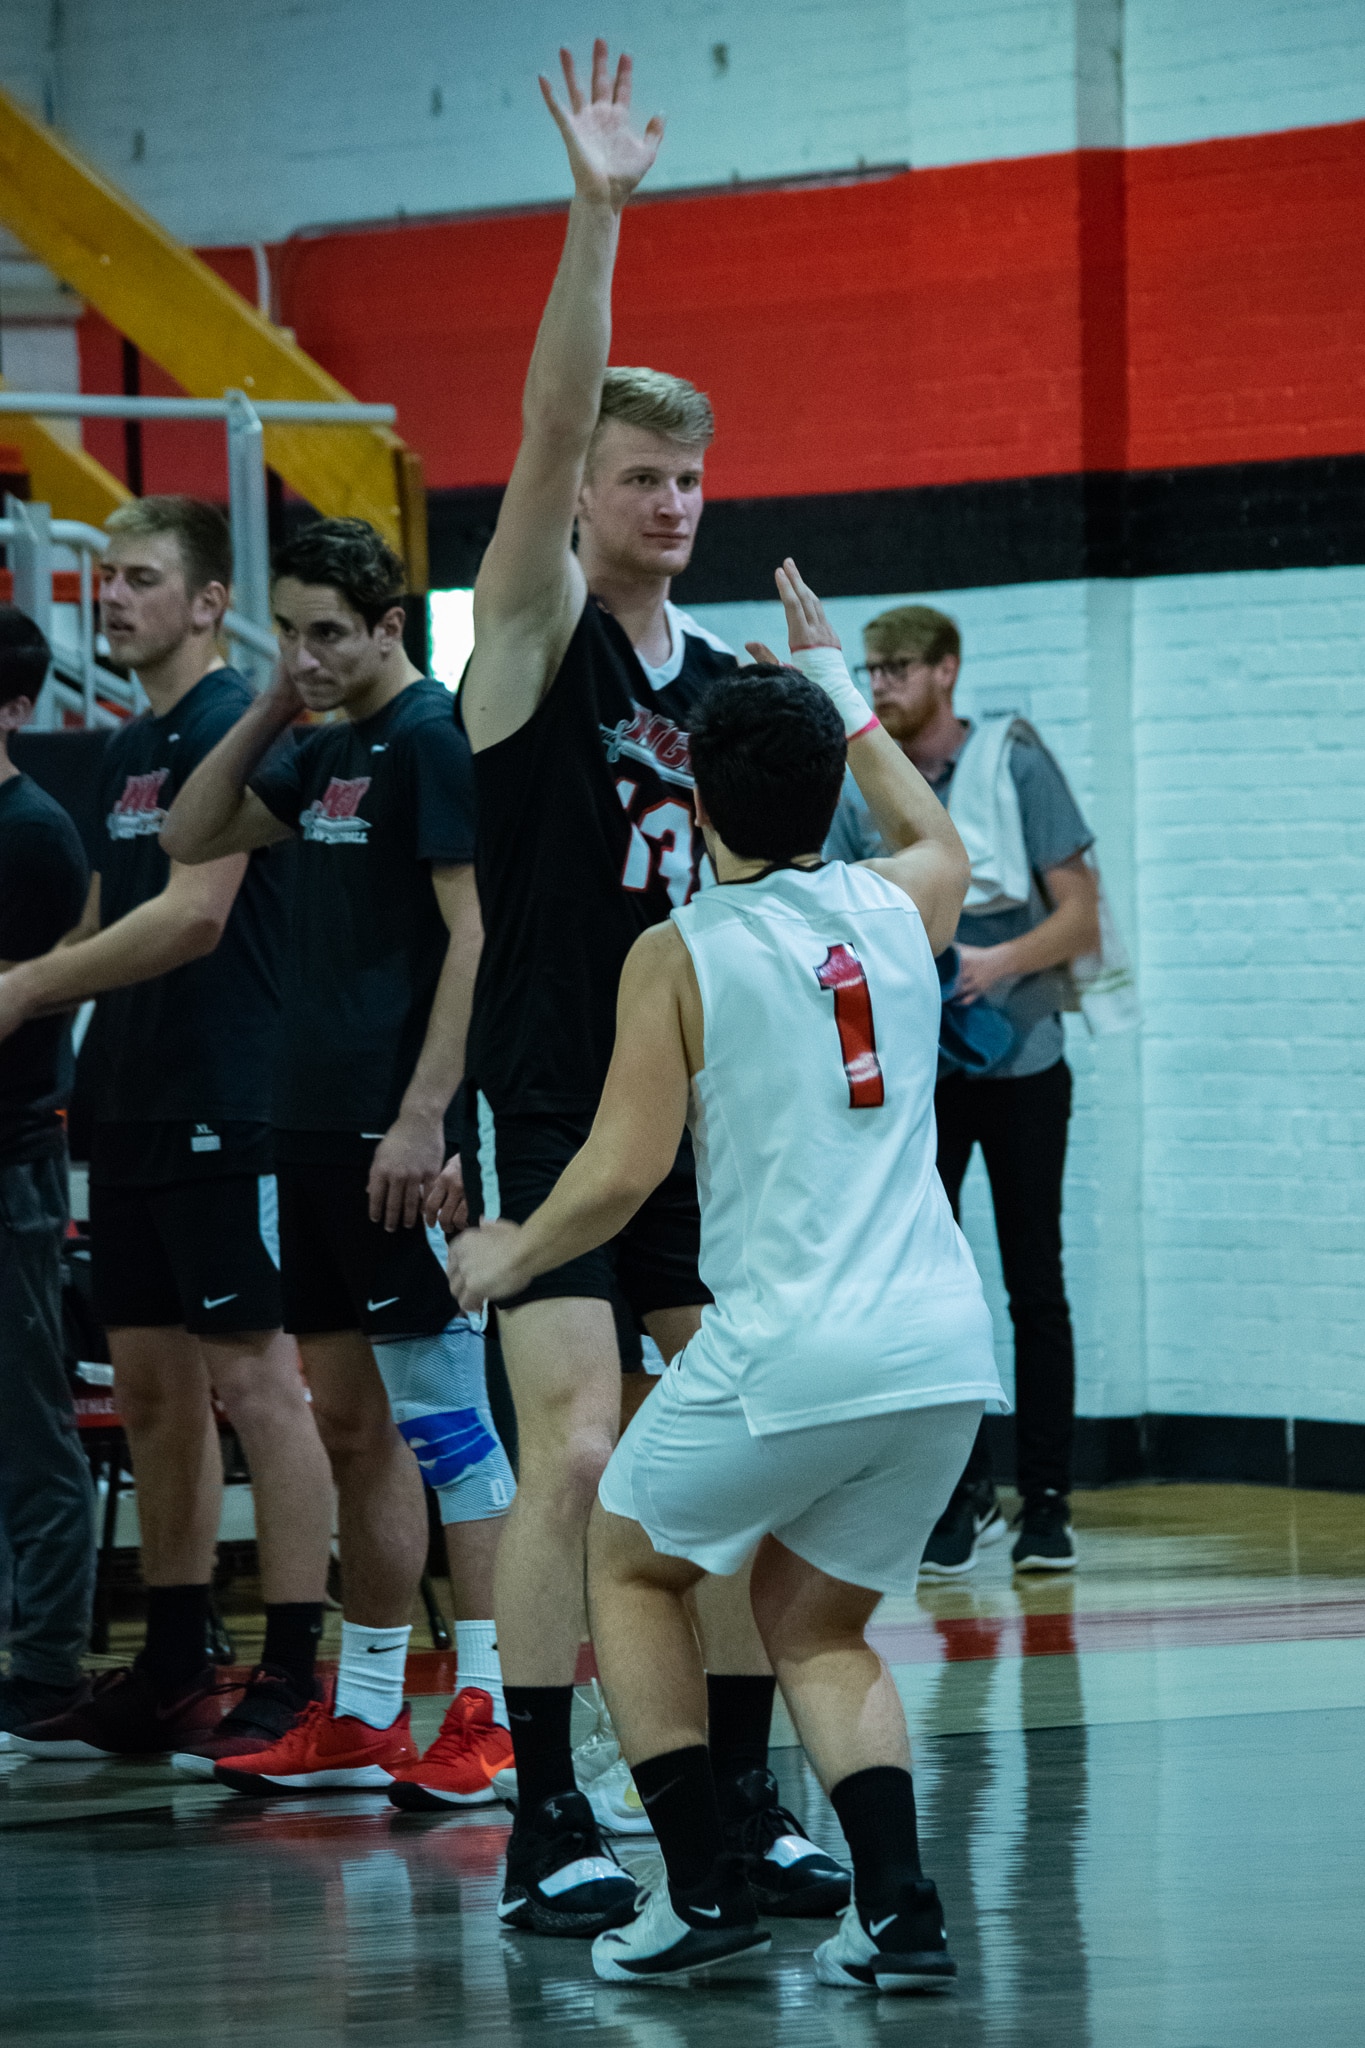 As sophomore Arlind Rojba (1) greets each player after being introduced, junior Ben Hamsho (13) lifts his arm to show off his height compared to Rojba.